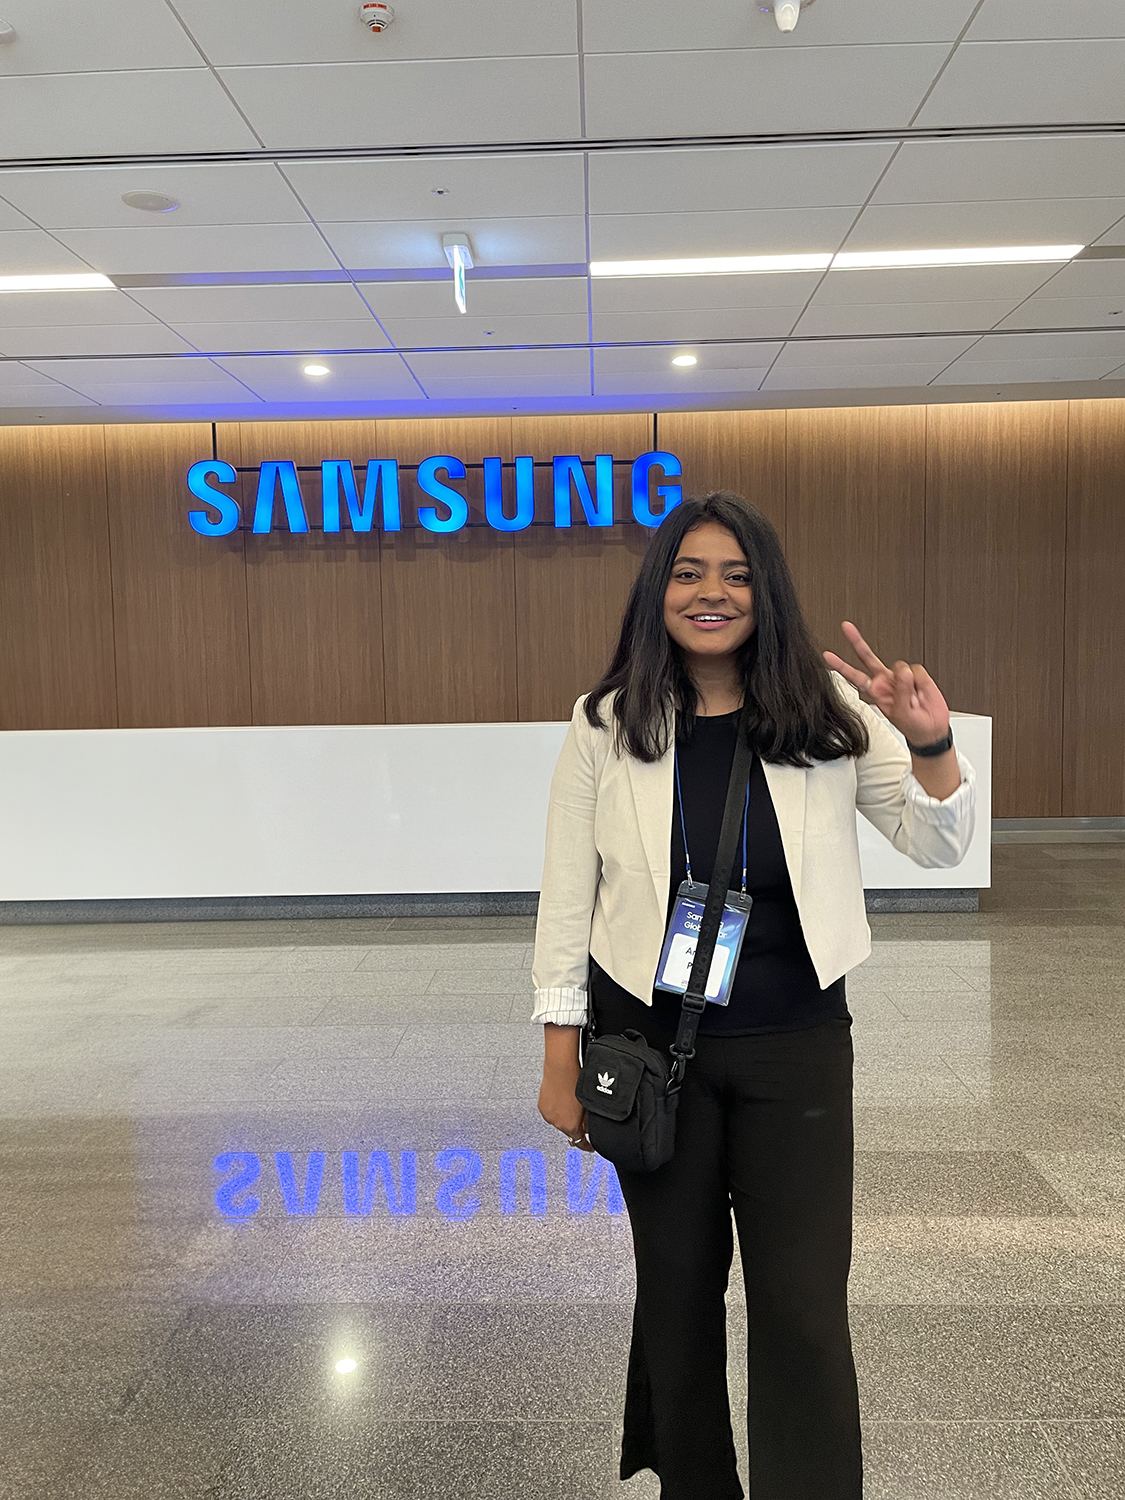 Ankita Paul stands in front of a Samsung sign